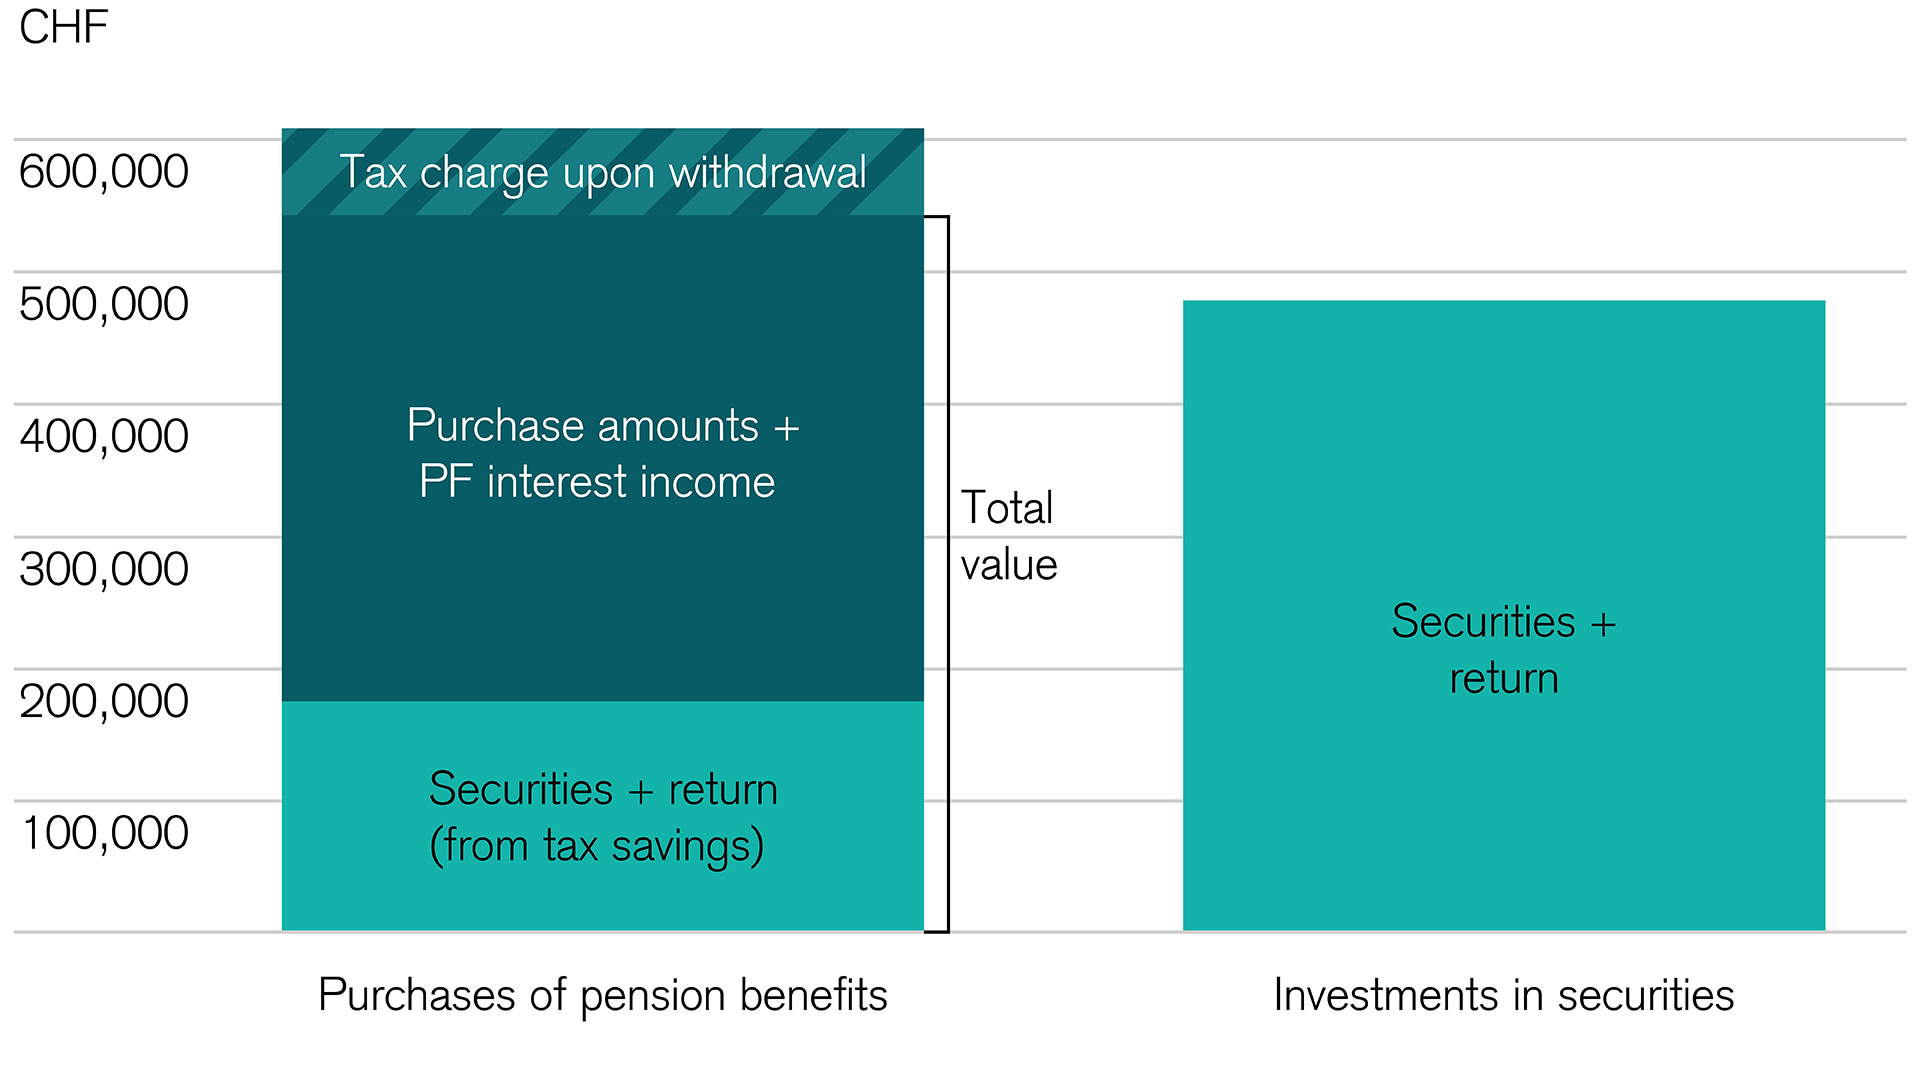 Purchasing pension benefits is attractive